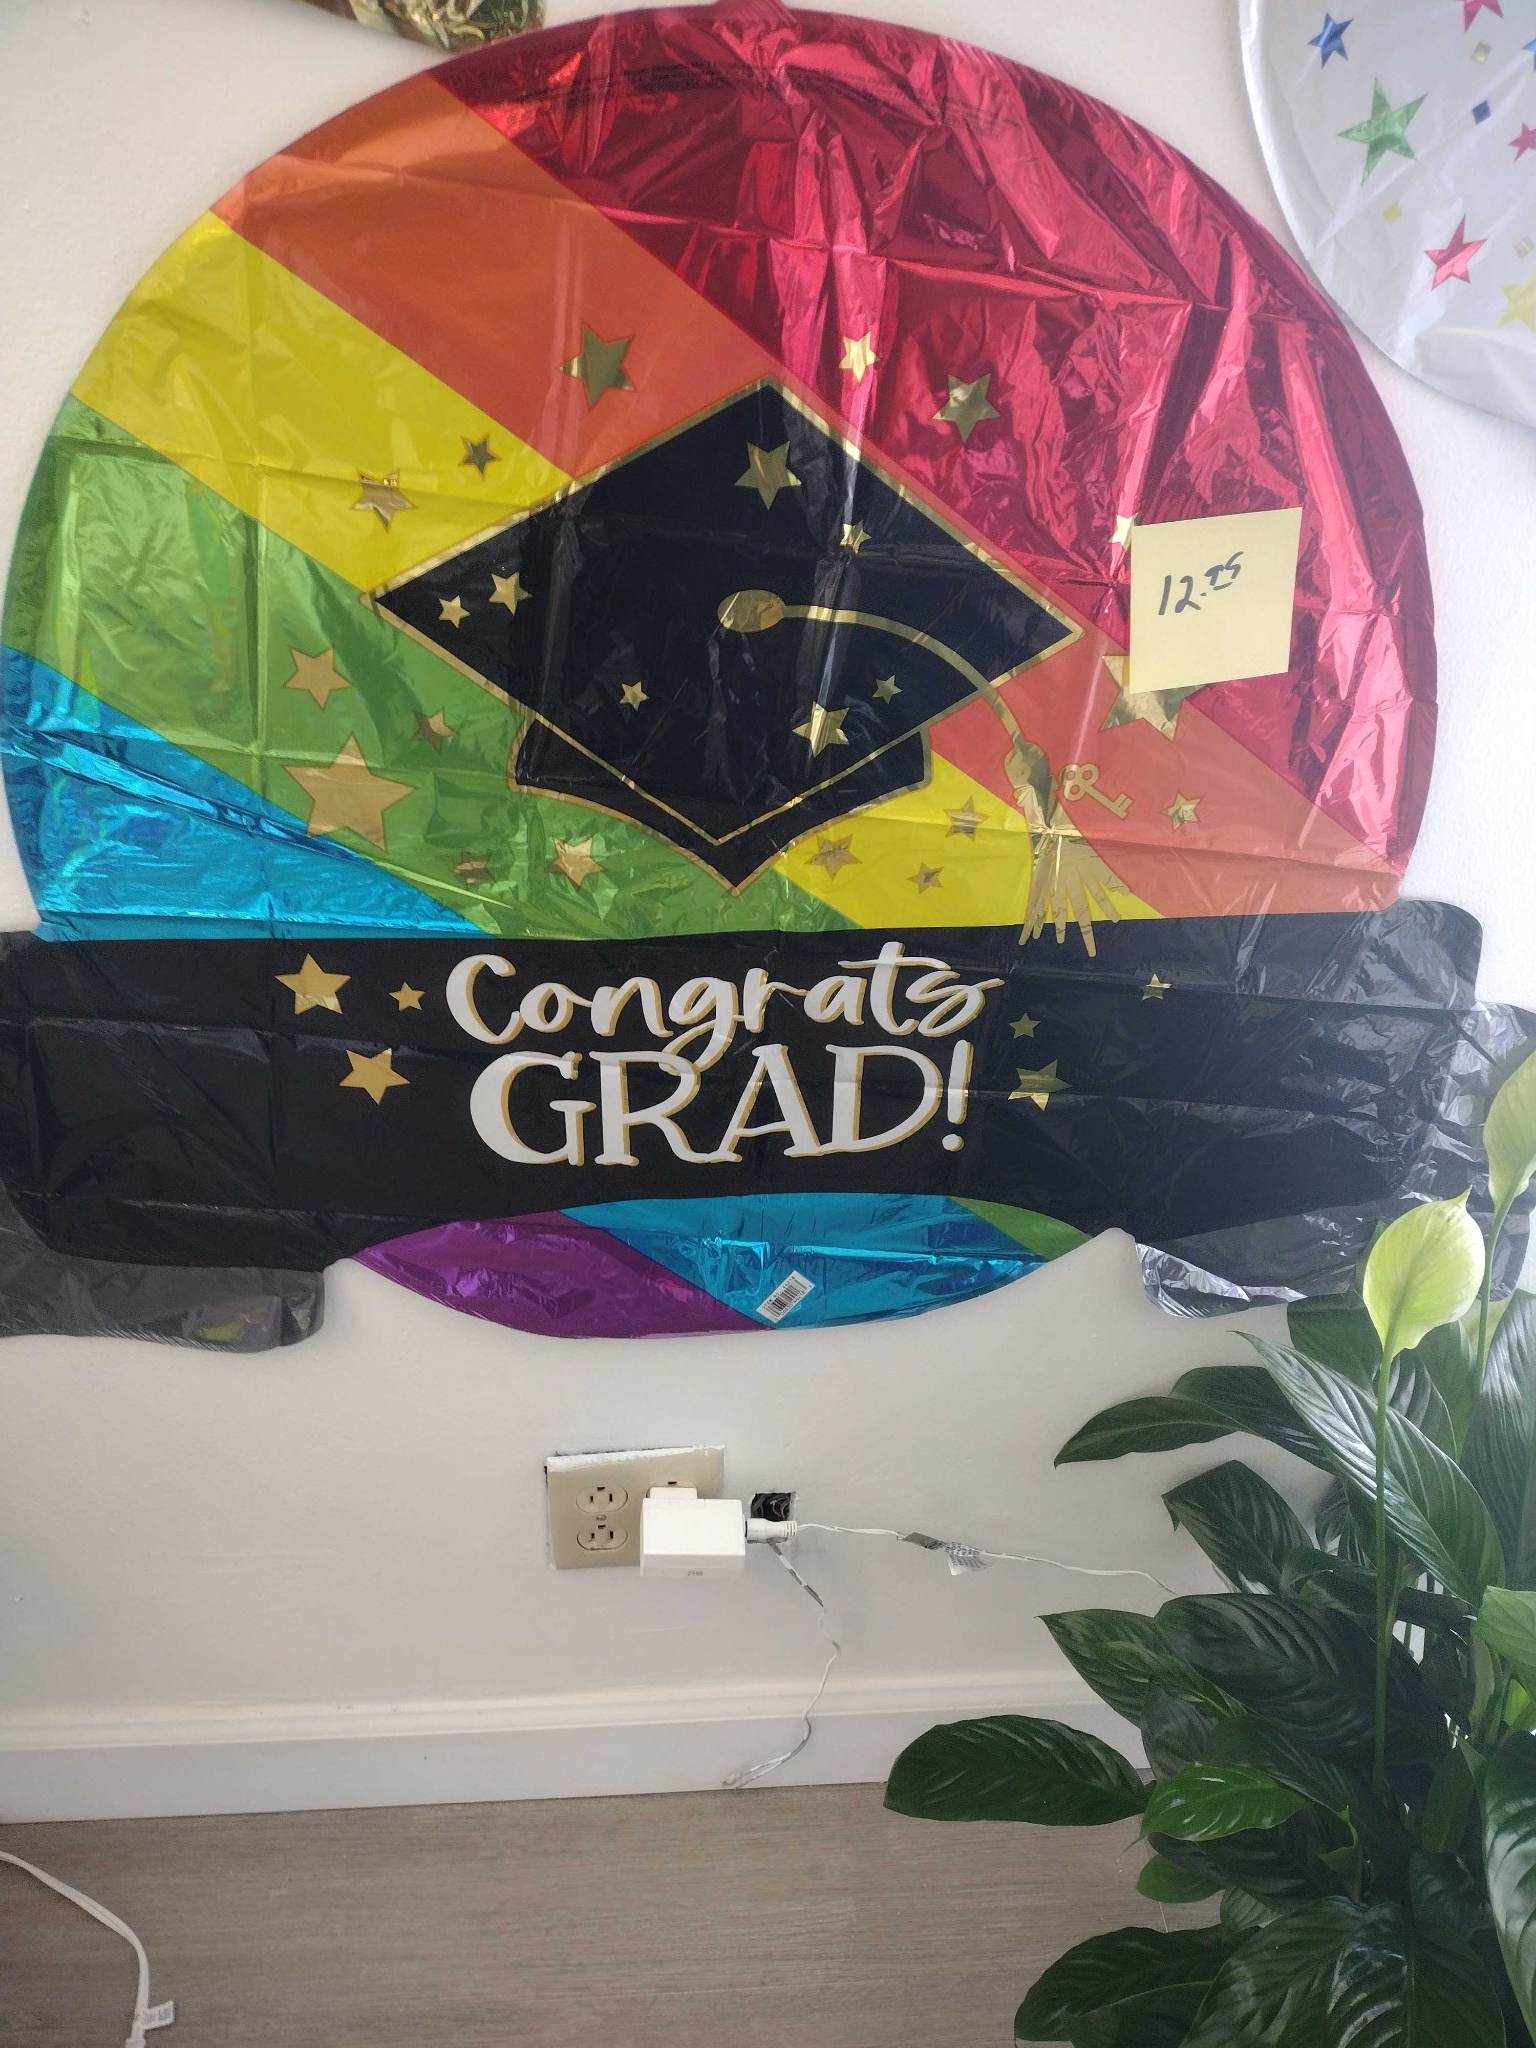 Congrats Grad! - 26in graduation mylar add to any balloon or flower bouquet.